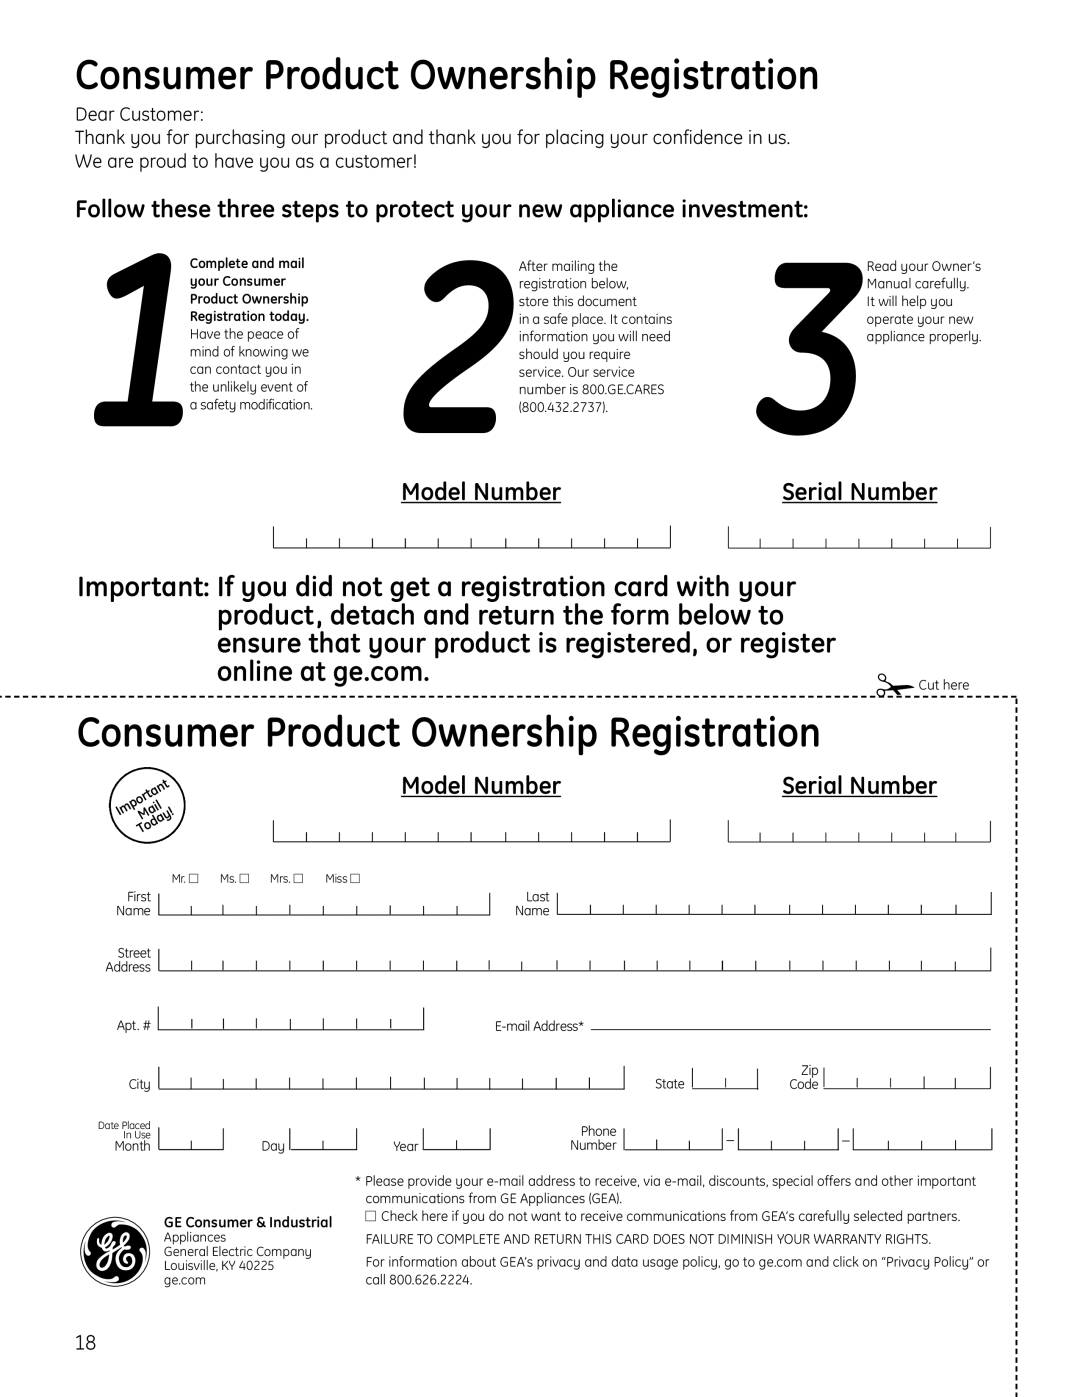 GE GTS12BBPLCC Consumer Product Ownership Registration, Follow these three steps to protect your new appliance investment 